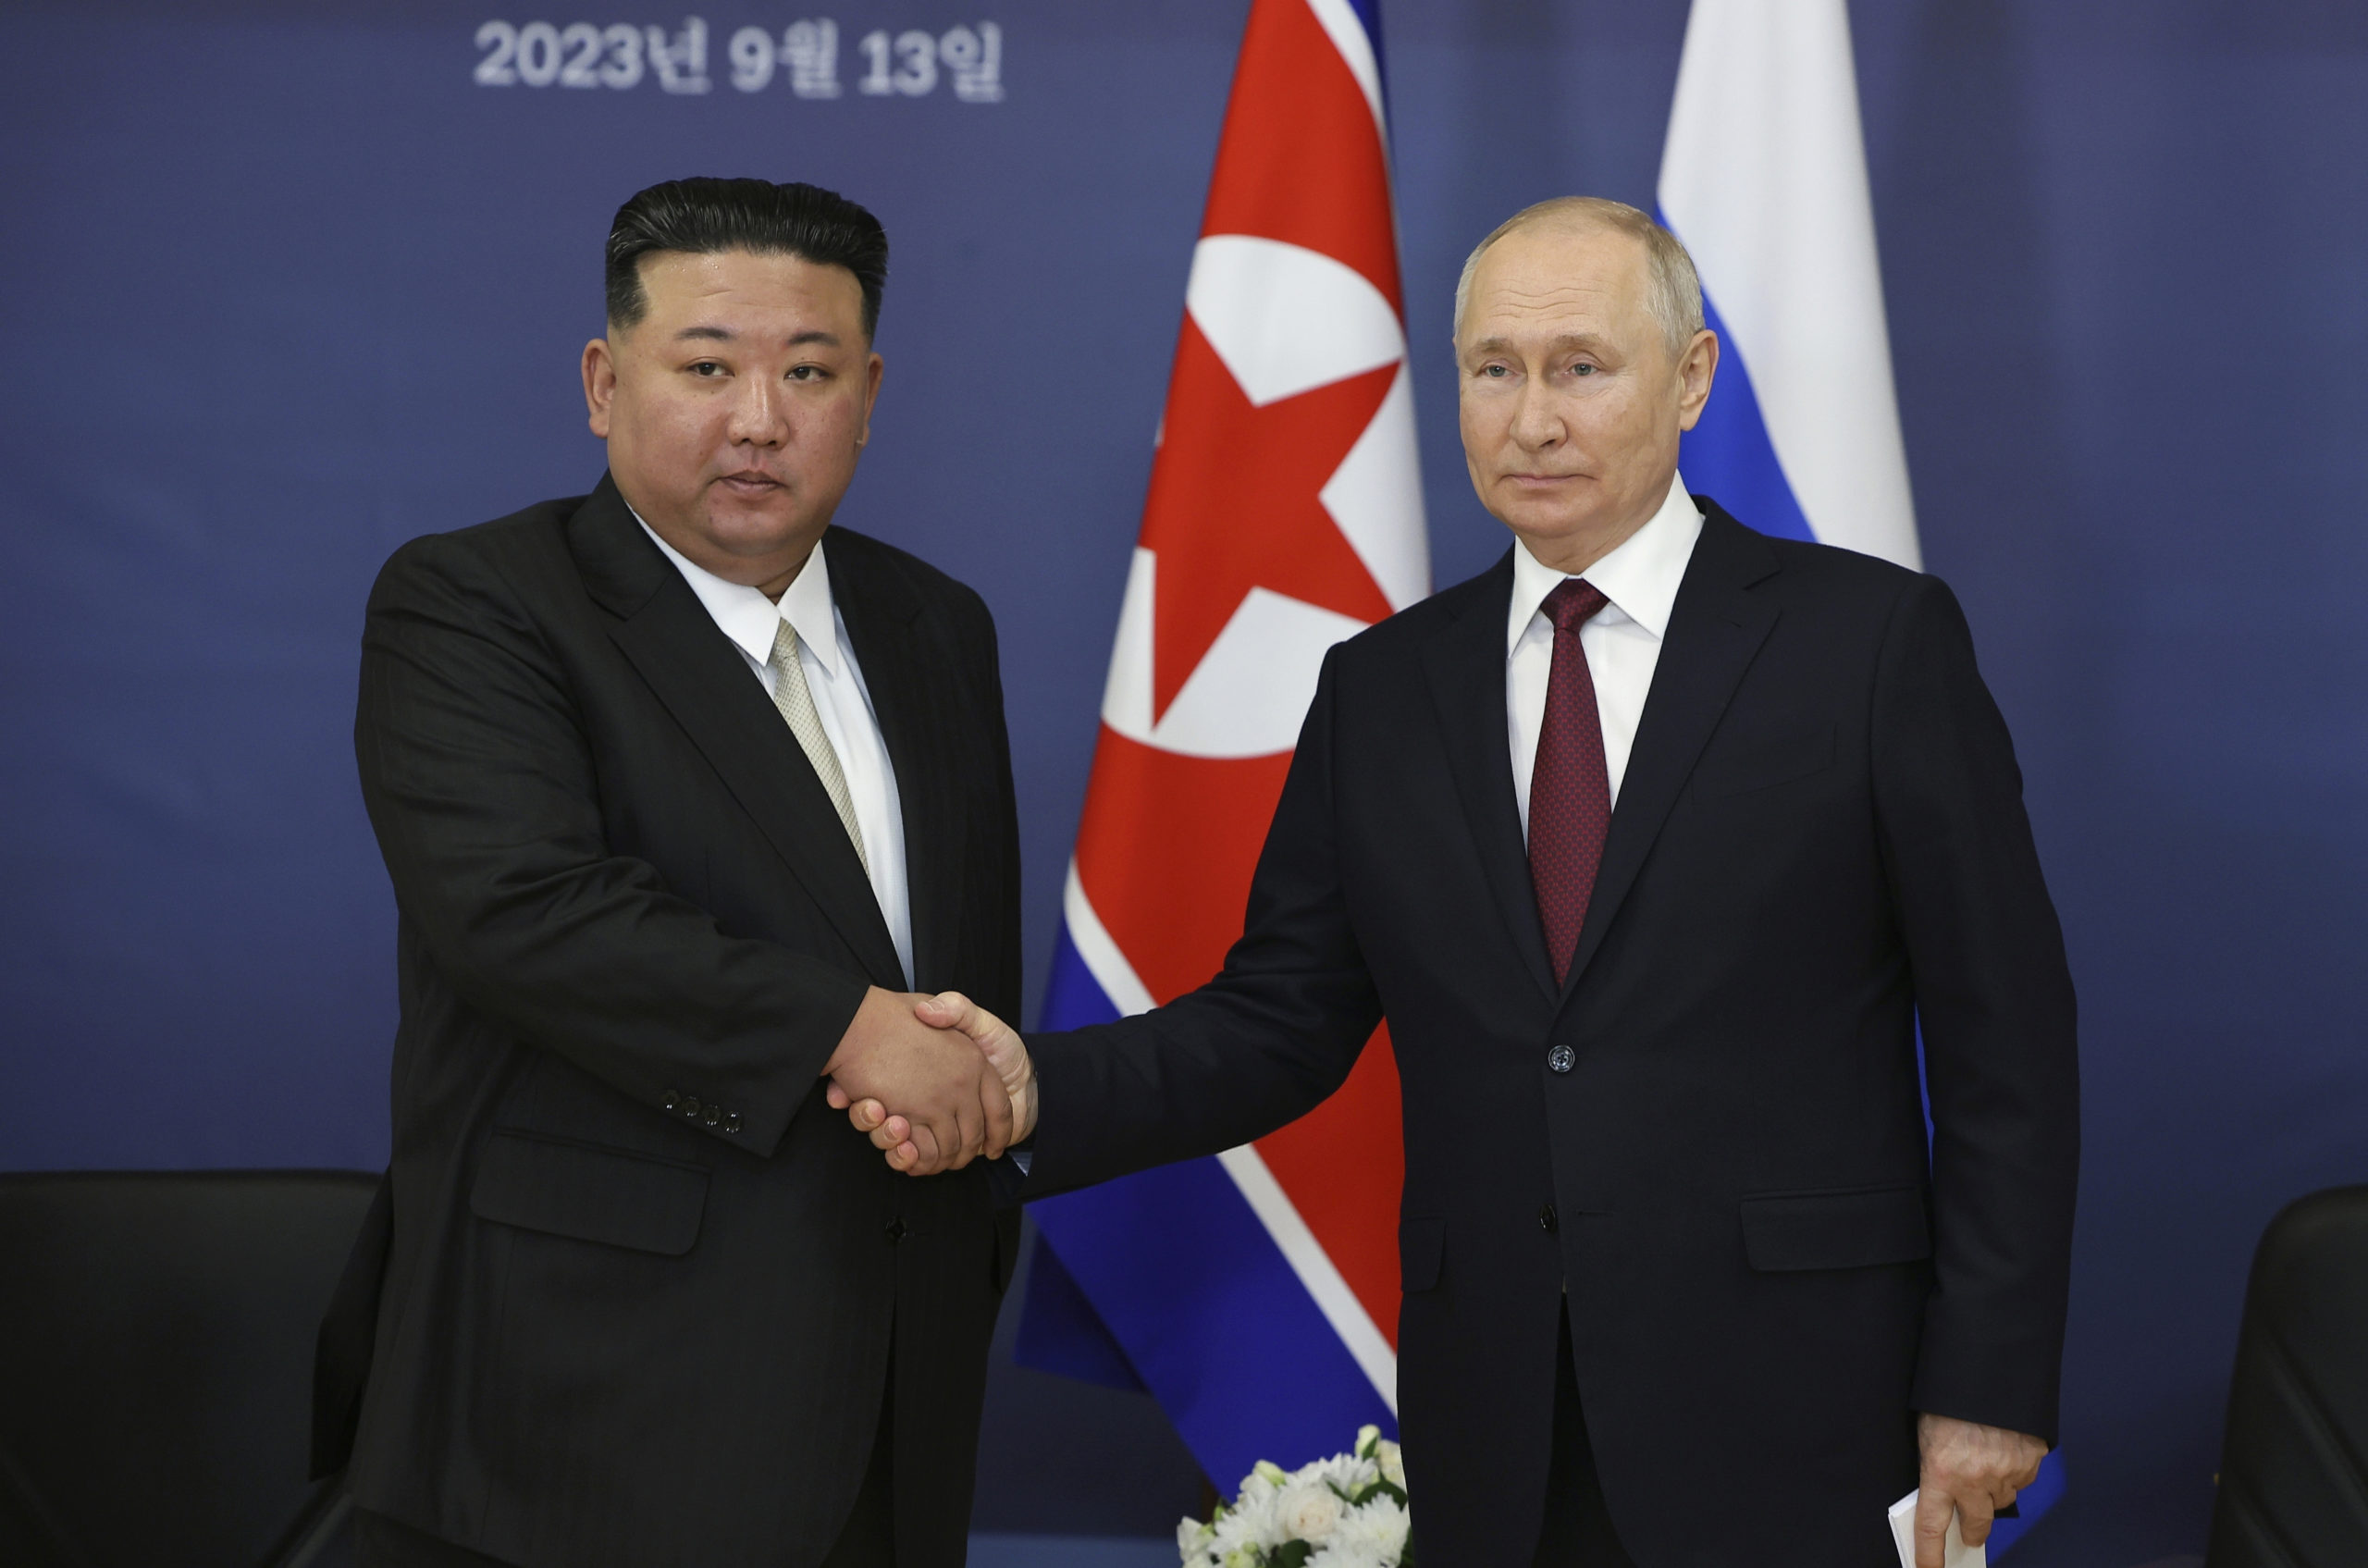 Russian President Vladimir Putin, right, and North Korea's leader Kim Jong Un are seen shaking hands in a file photo taken during a September meeting.